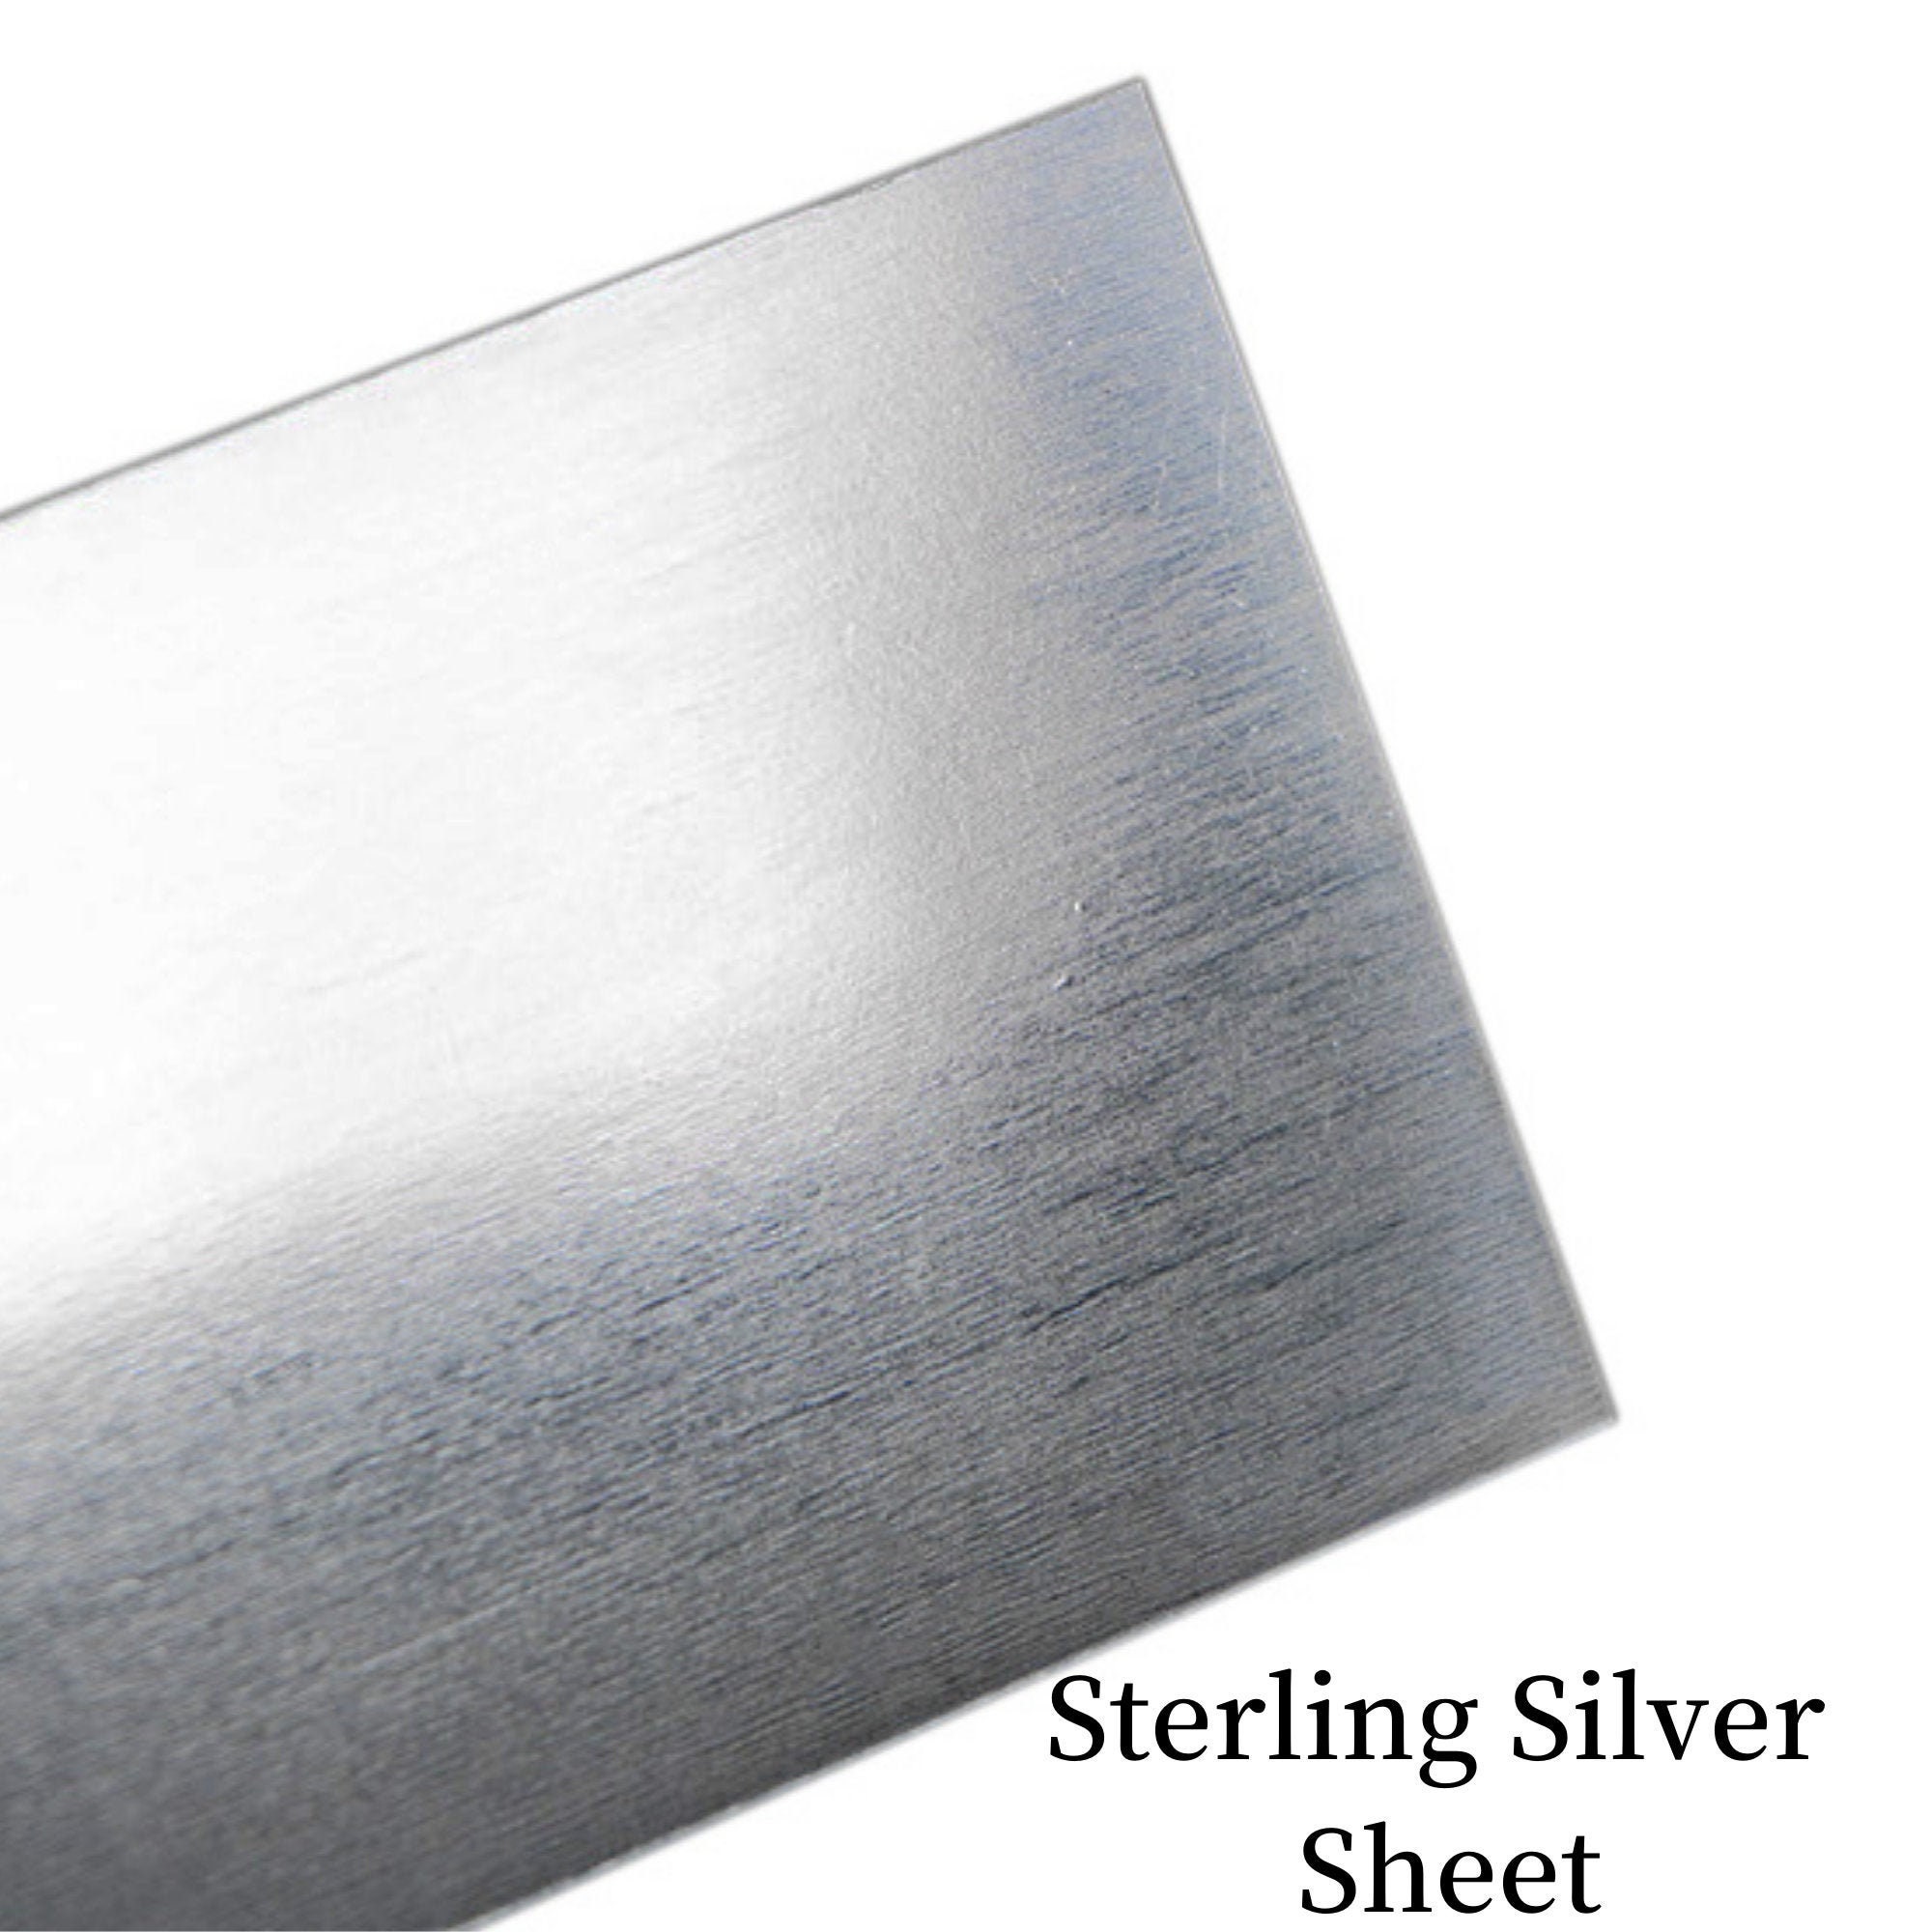 925/999 Pure Sterling Silver Sheet, Blanks, Solid for Metal